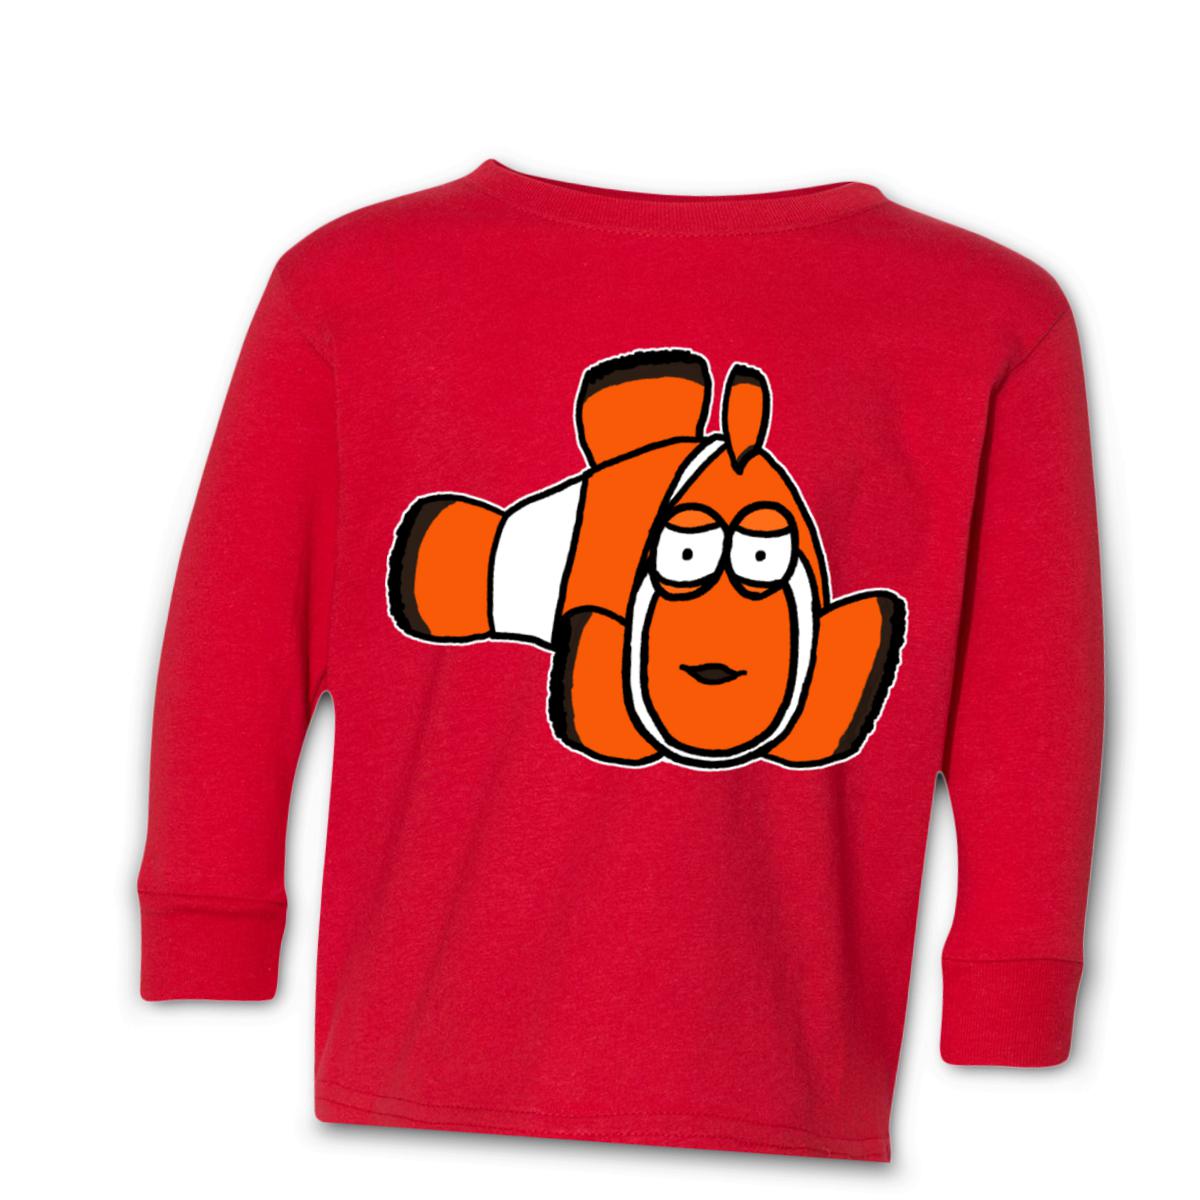 Clown Fish Toddler Long Sleeve Tee 4T red